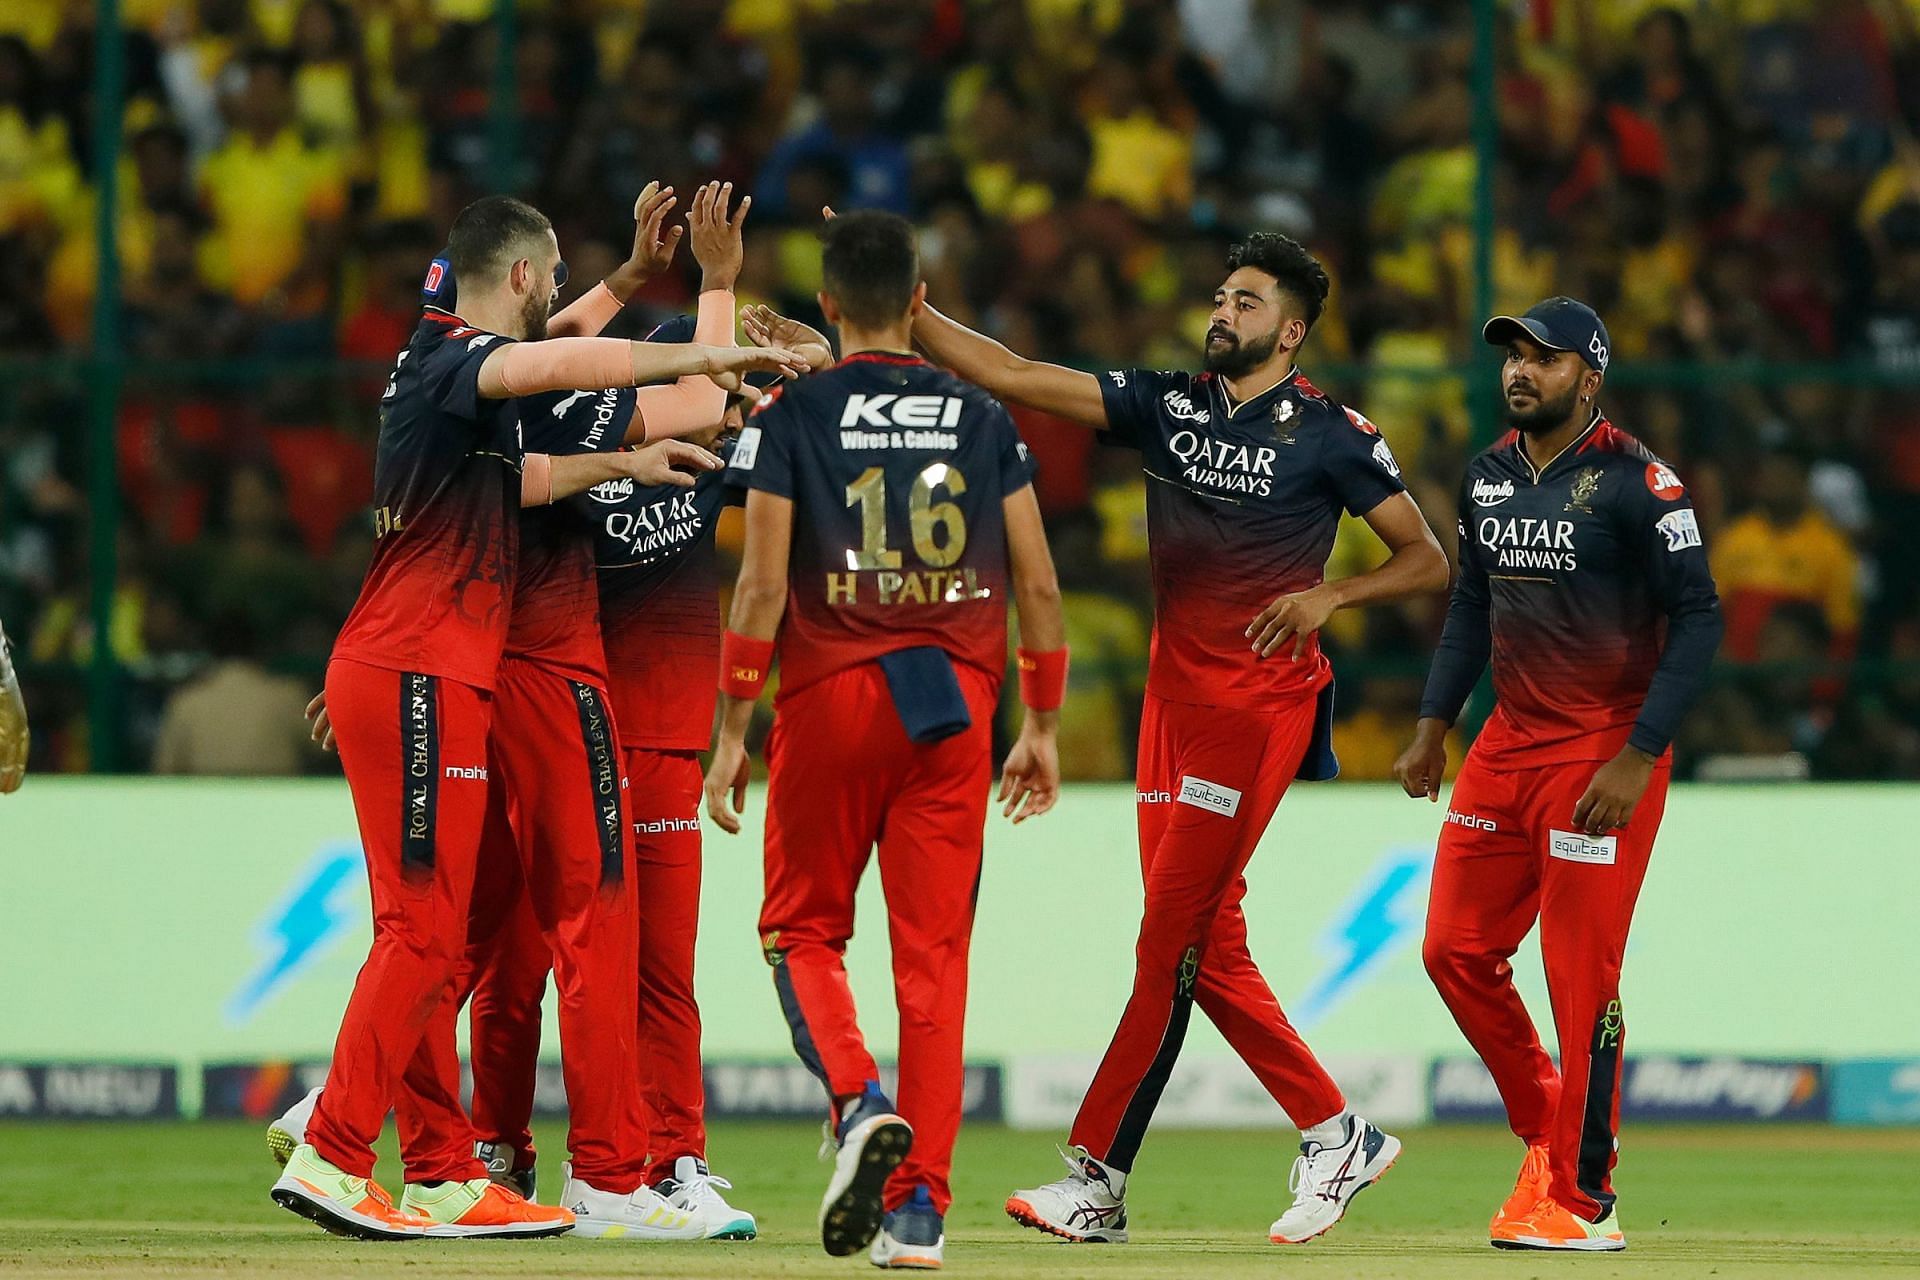 Royal Challengers Bangalore players celebrate the wicket of Shivam Dube during the IPL 2023 match between Royal Challengers Bangalore and Chennai Super Kings